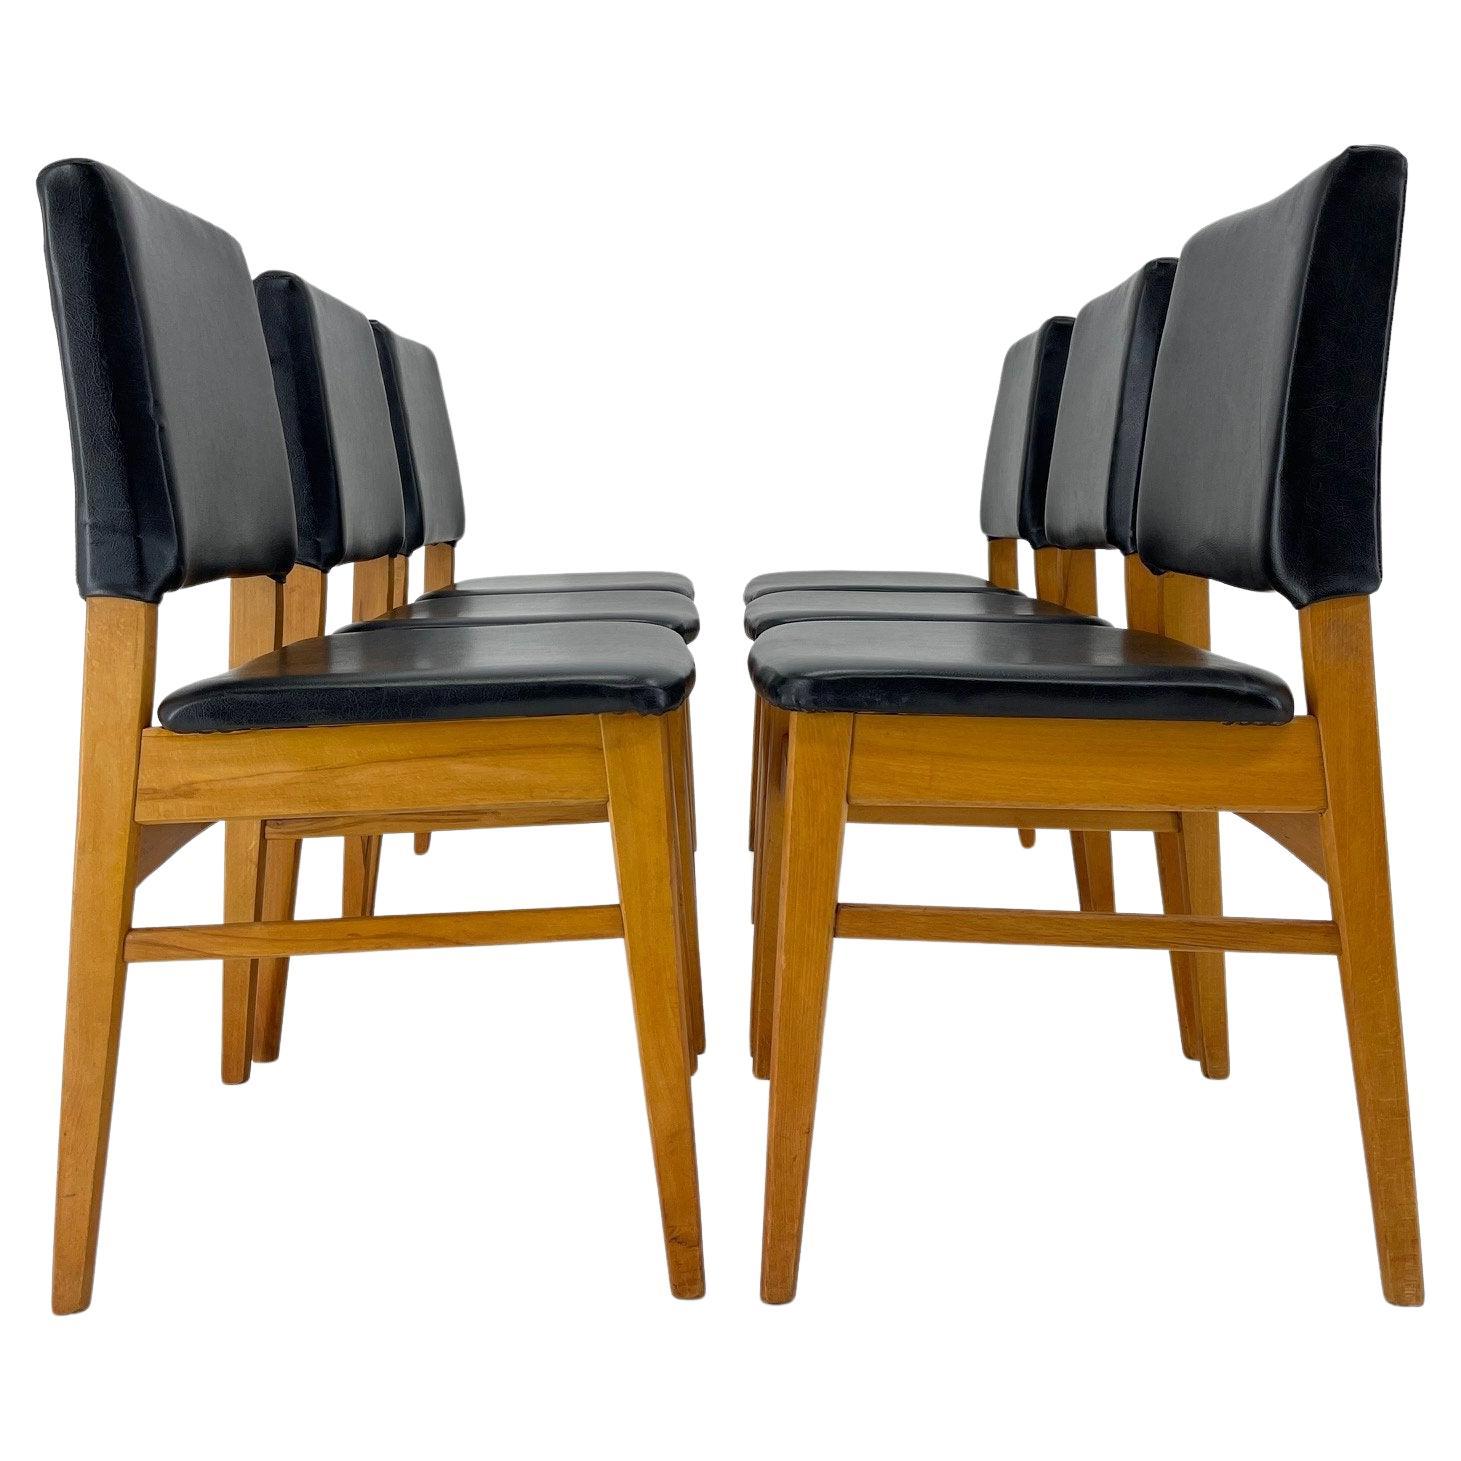 Set of 6 Leatherette & Wood Chairs, Czechoslovakia, 1960's For Sale